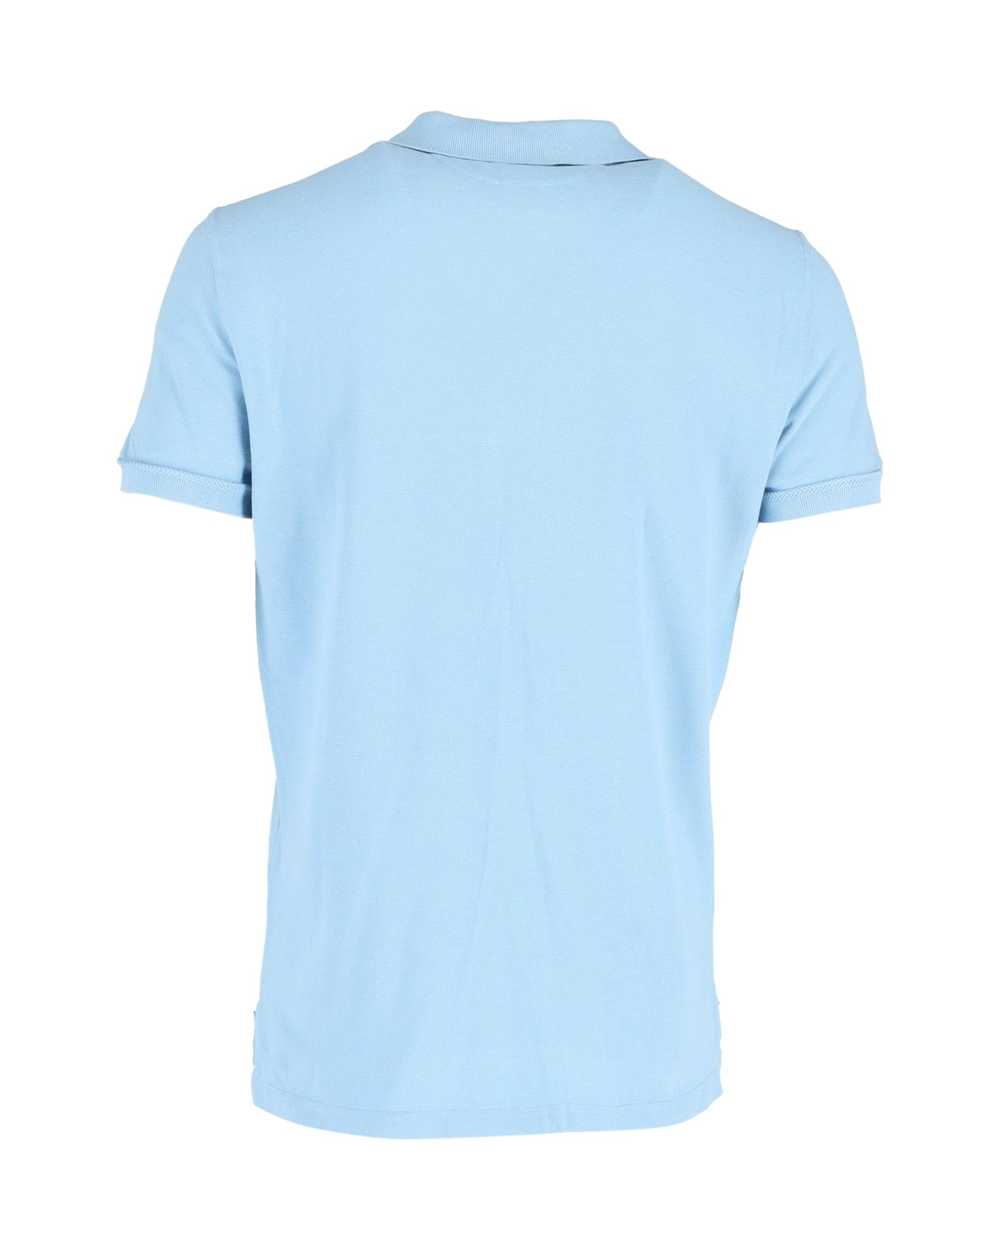 Product Details Tom Ford Blue Polo Shirt - image 4